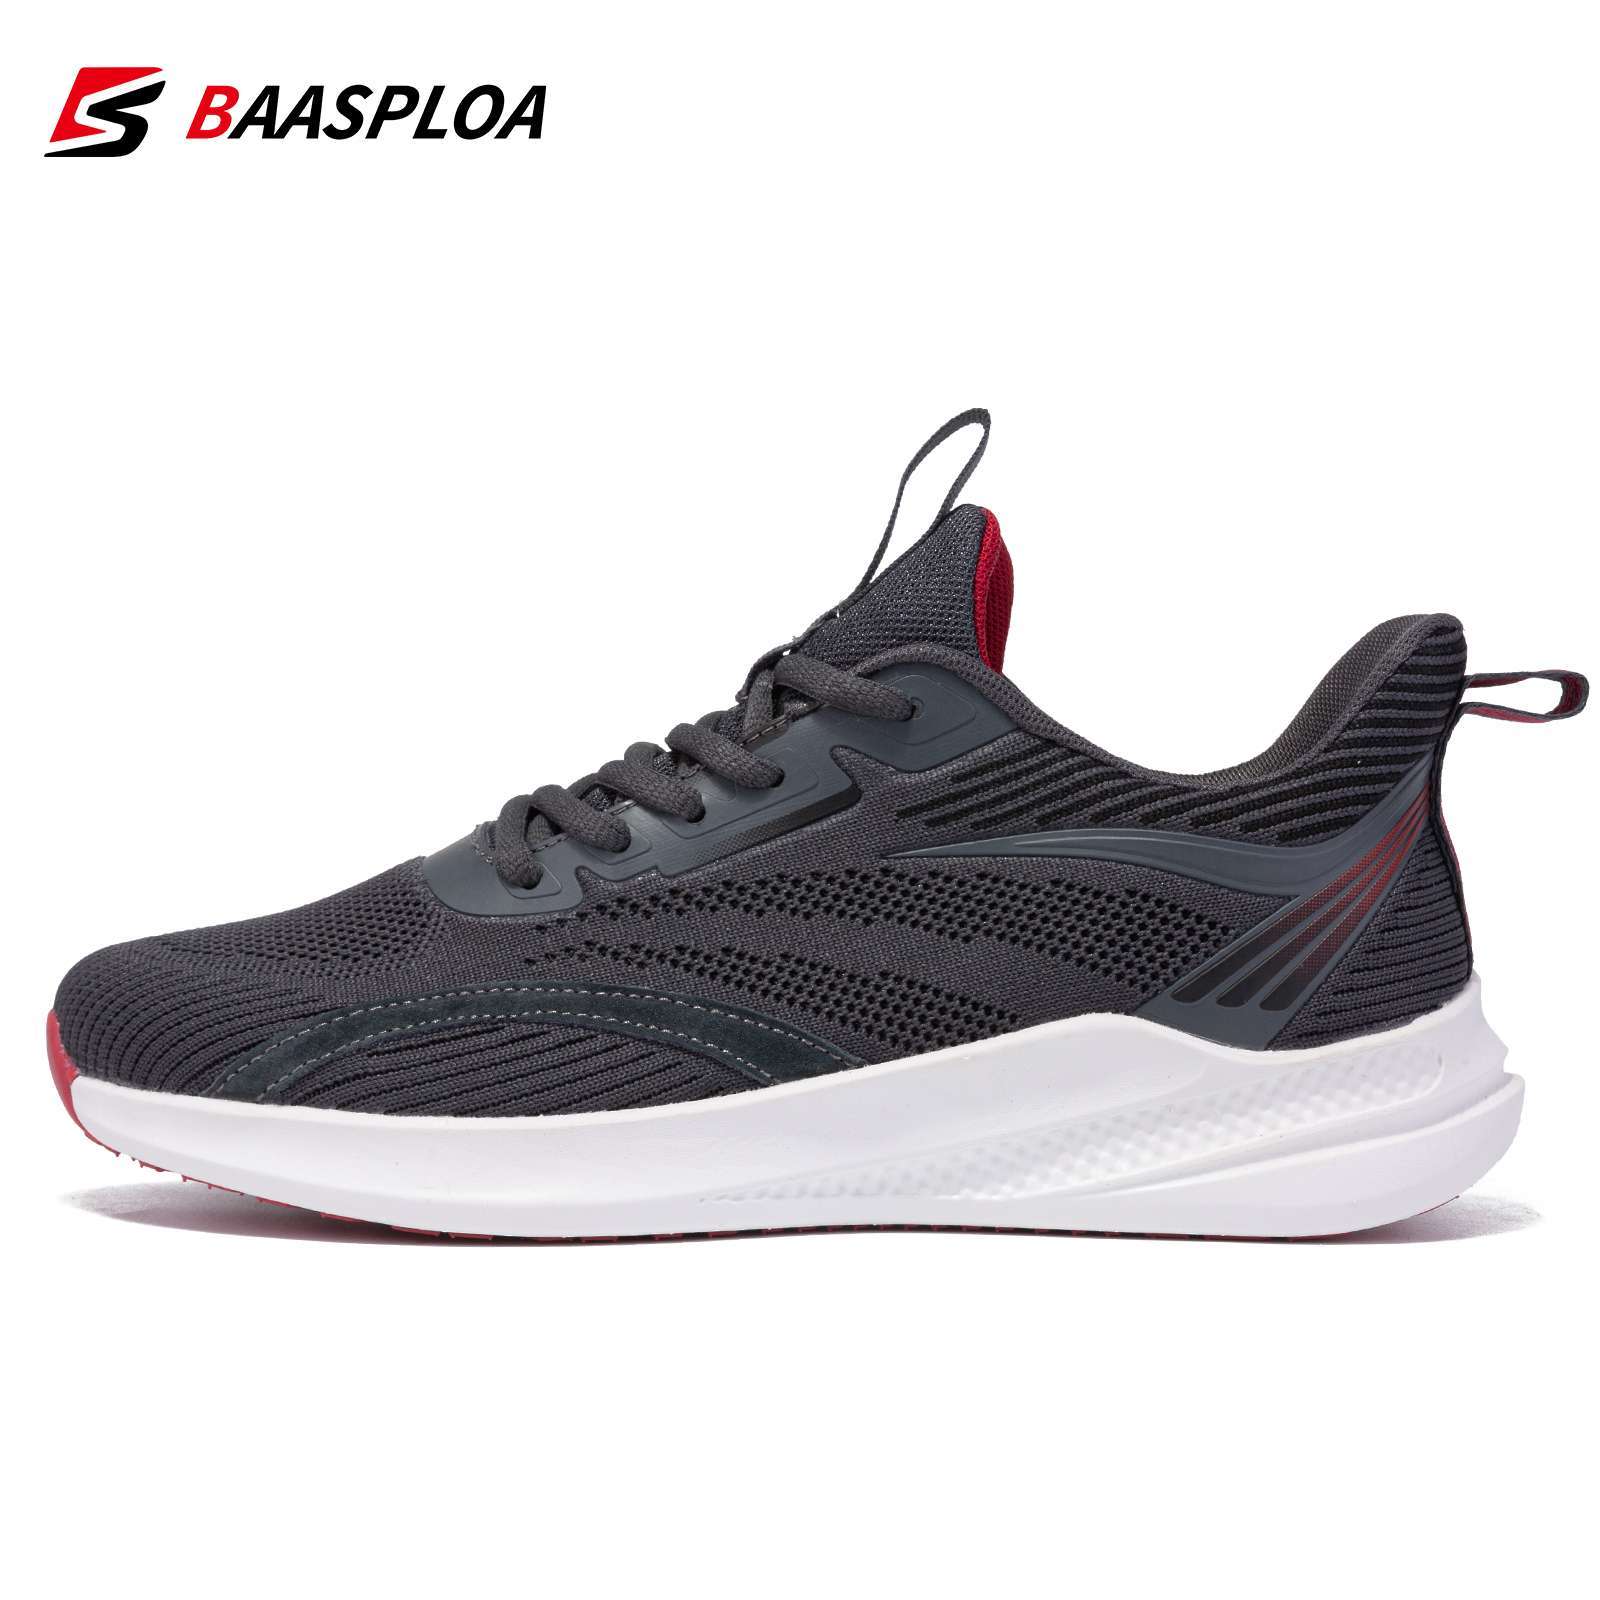 Baasploa 2022 New Men Sneakers Wear Resistant Running Shoes Breathable Male Shoes Sport Shoes Knit Comfortable